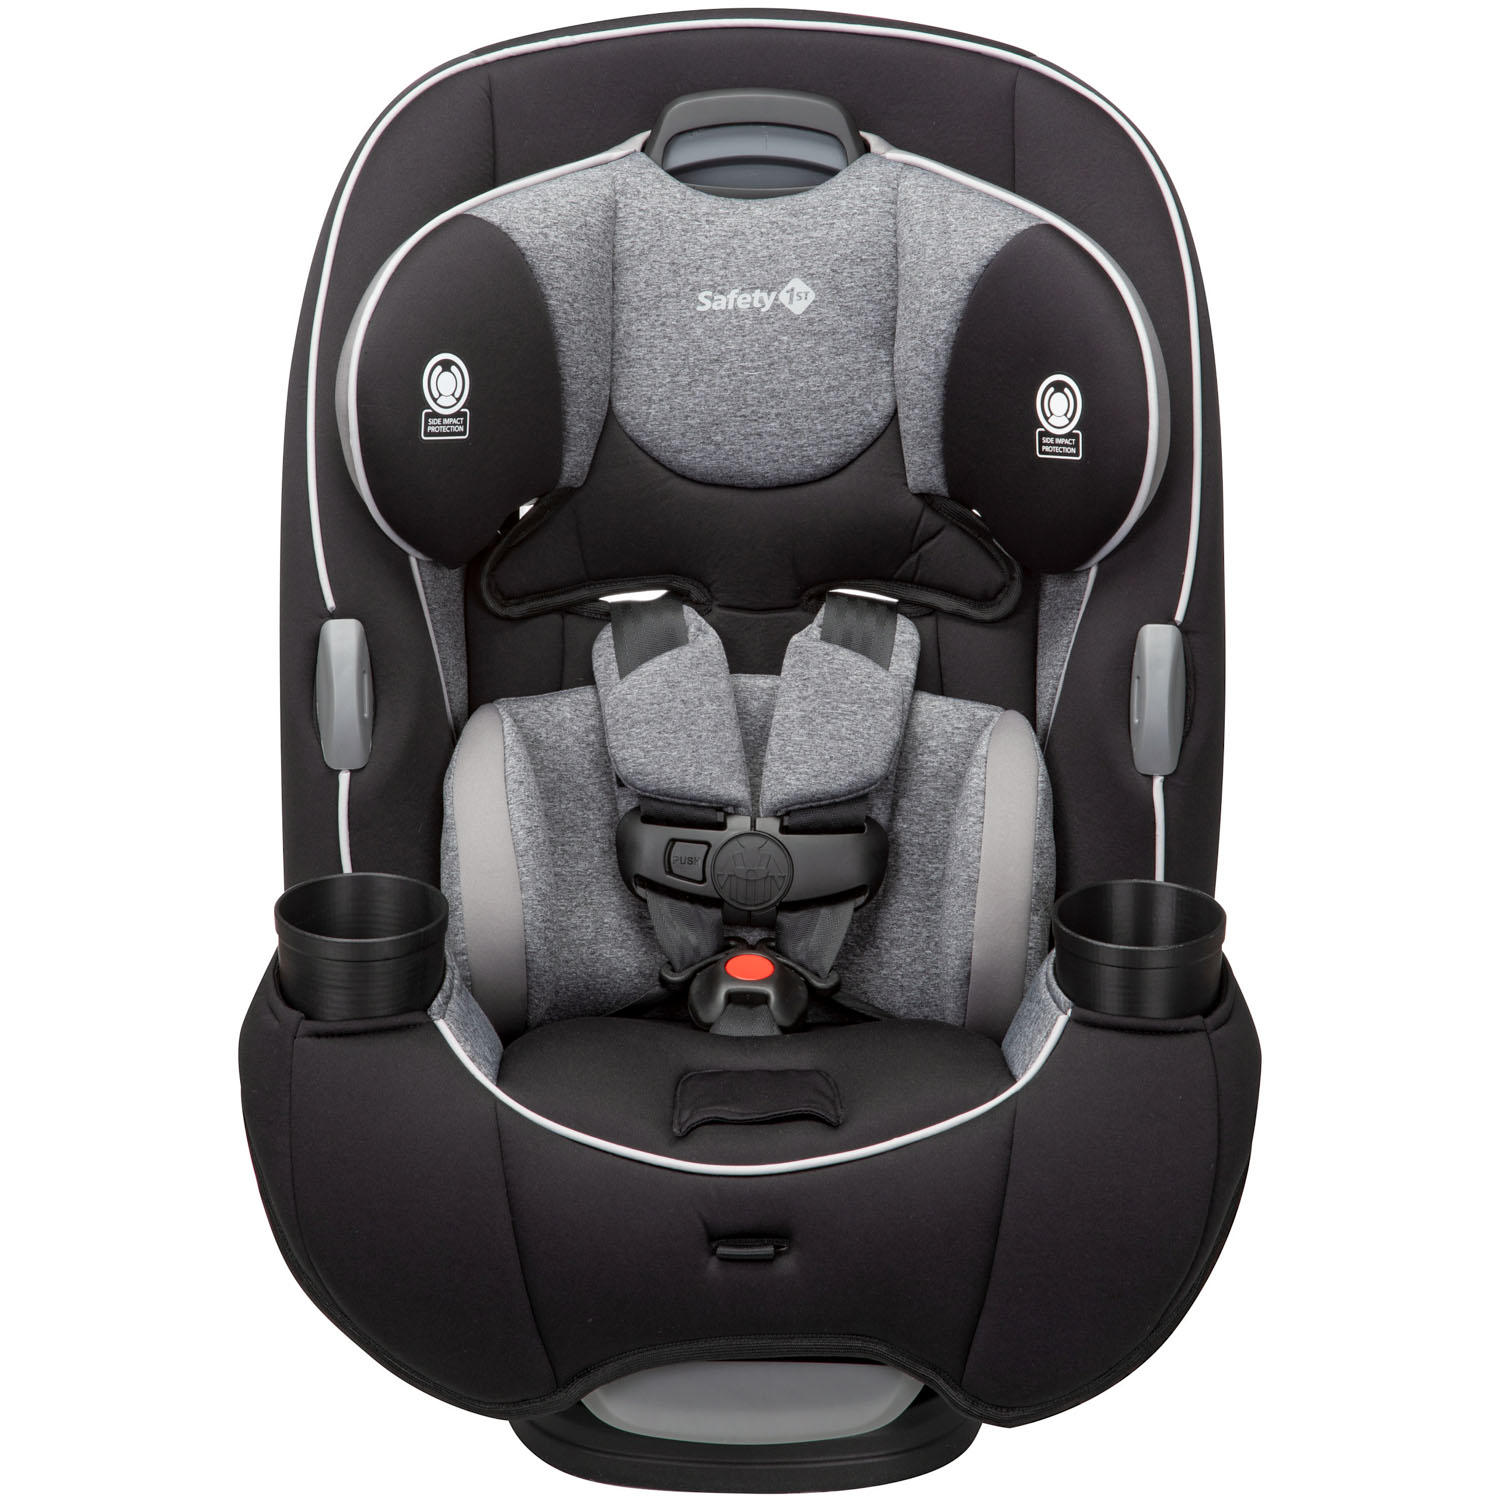 Safety 1st EverFit All-in-One Car Seat (3 colors)